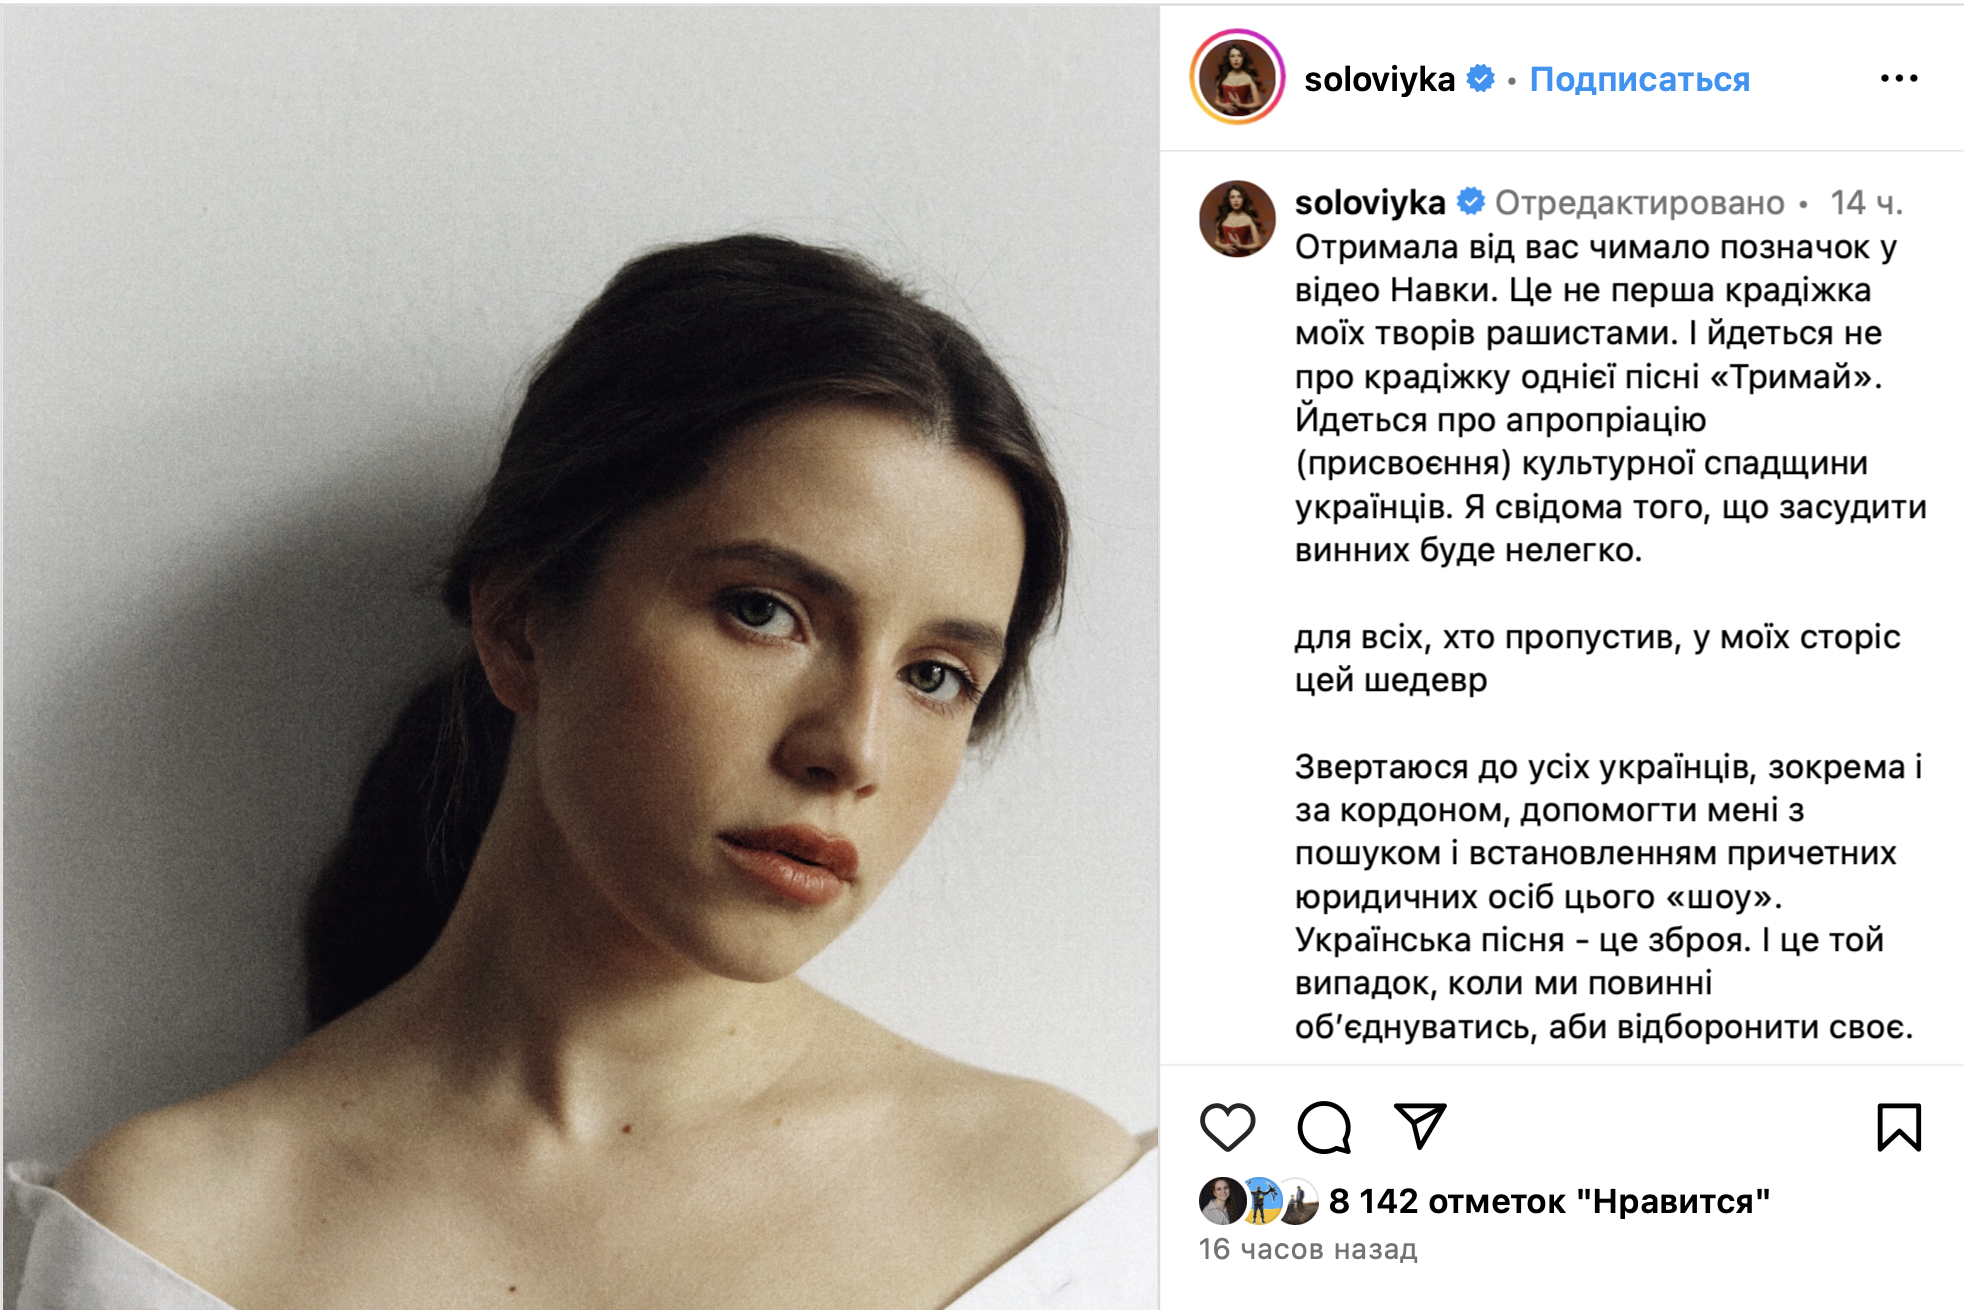 Peskov's wife from Dnipro Tatyana Navka stole Ukrainian songs for her show: Khrystyna Soloviy wants to sue